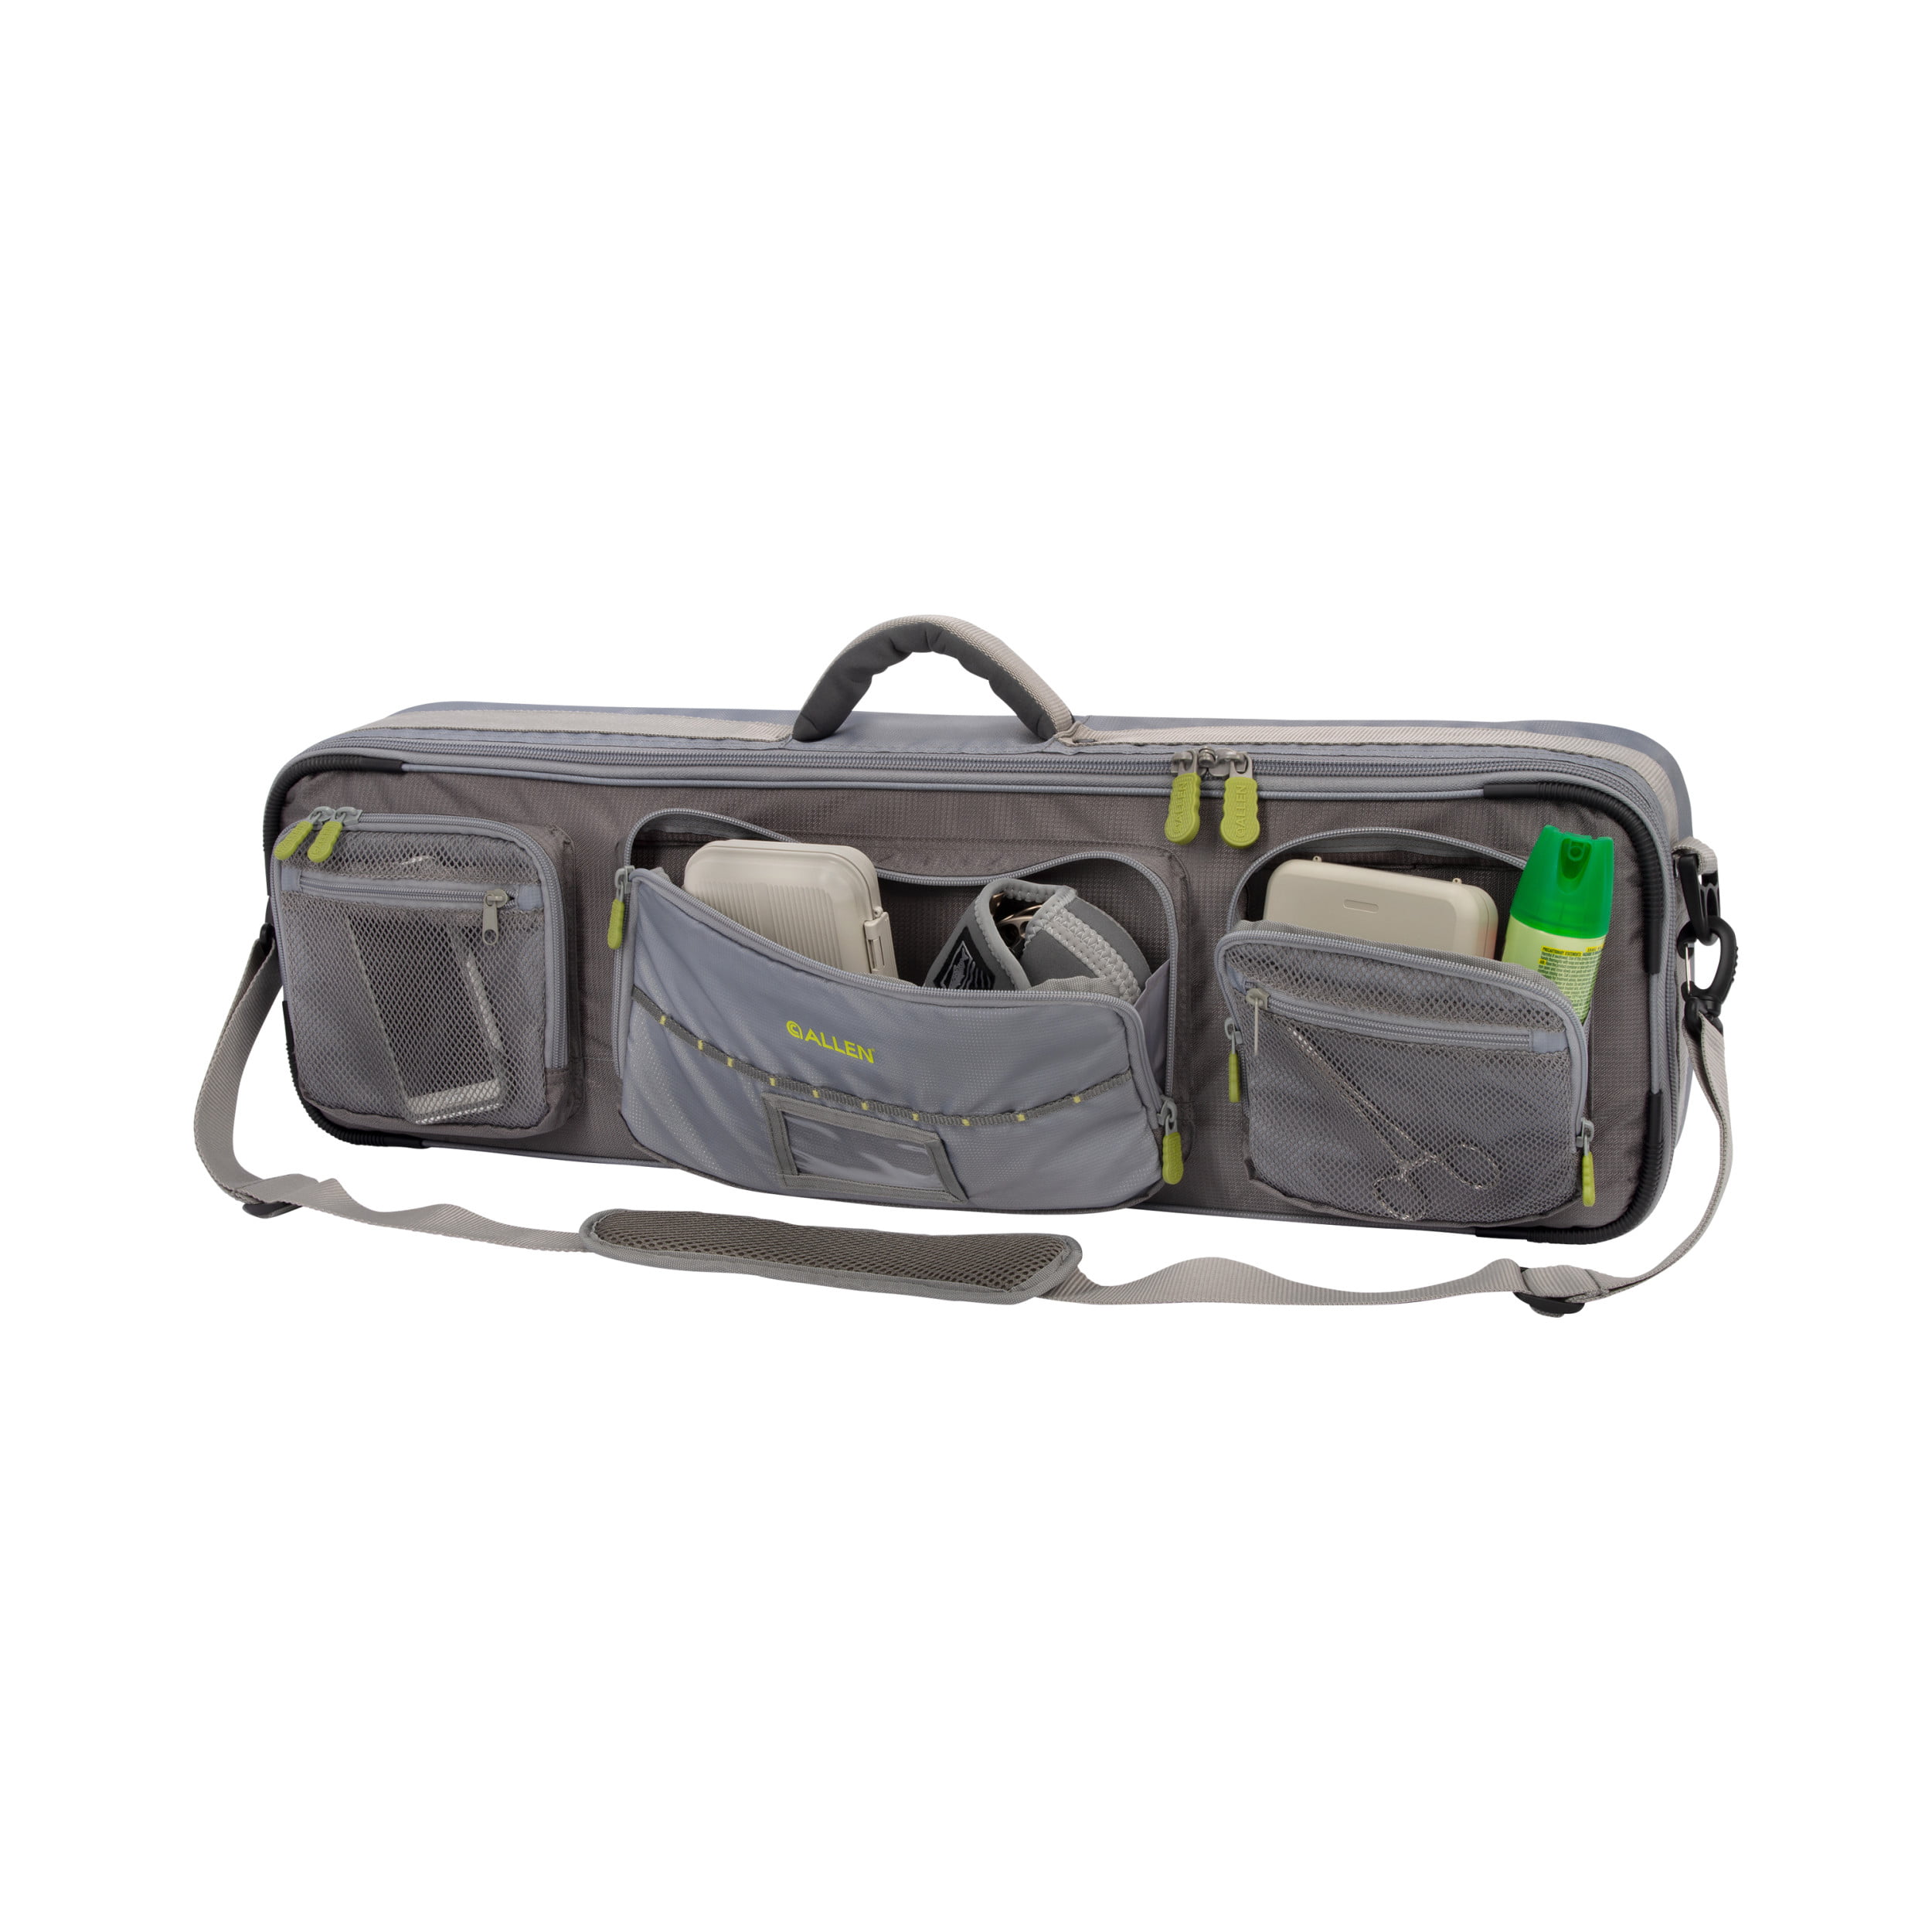 Allen Company Cottonwood Fly Fishing Rod And Gear Bag Case, Holds 4 Fishing  Rods, Multi